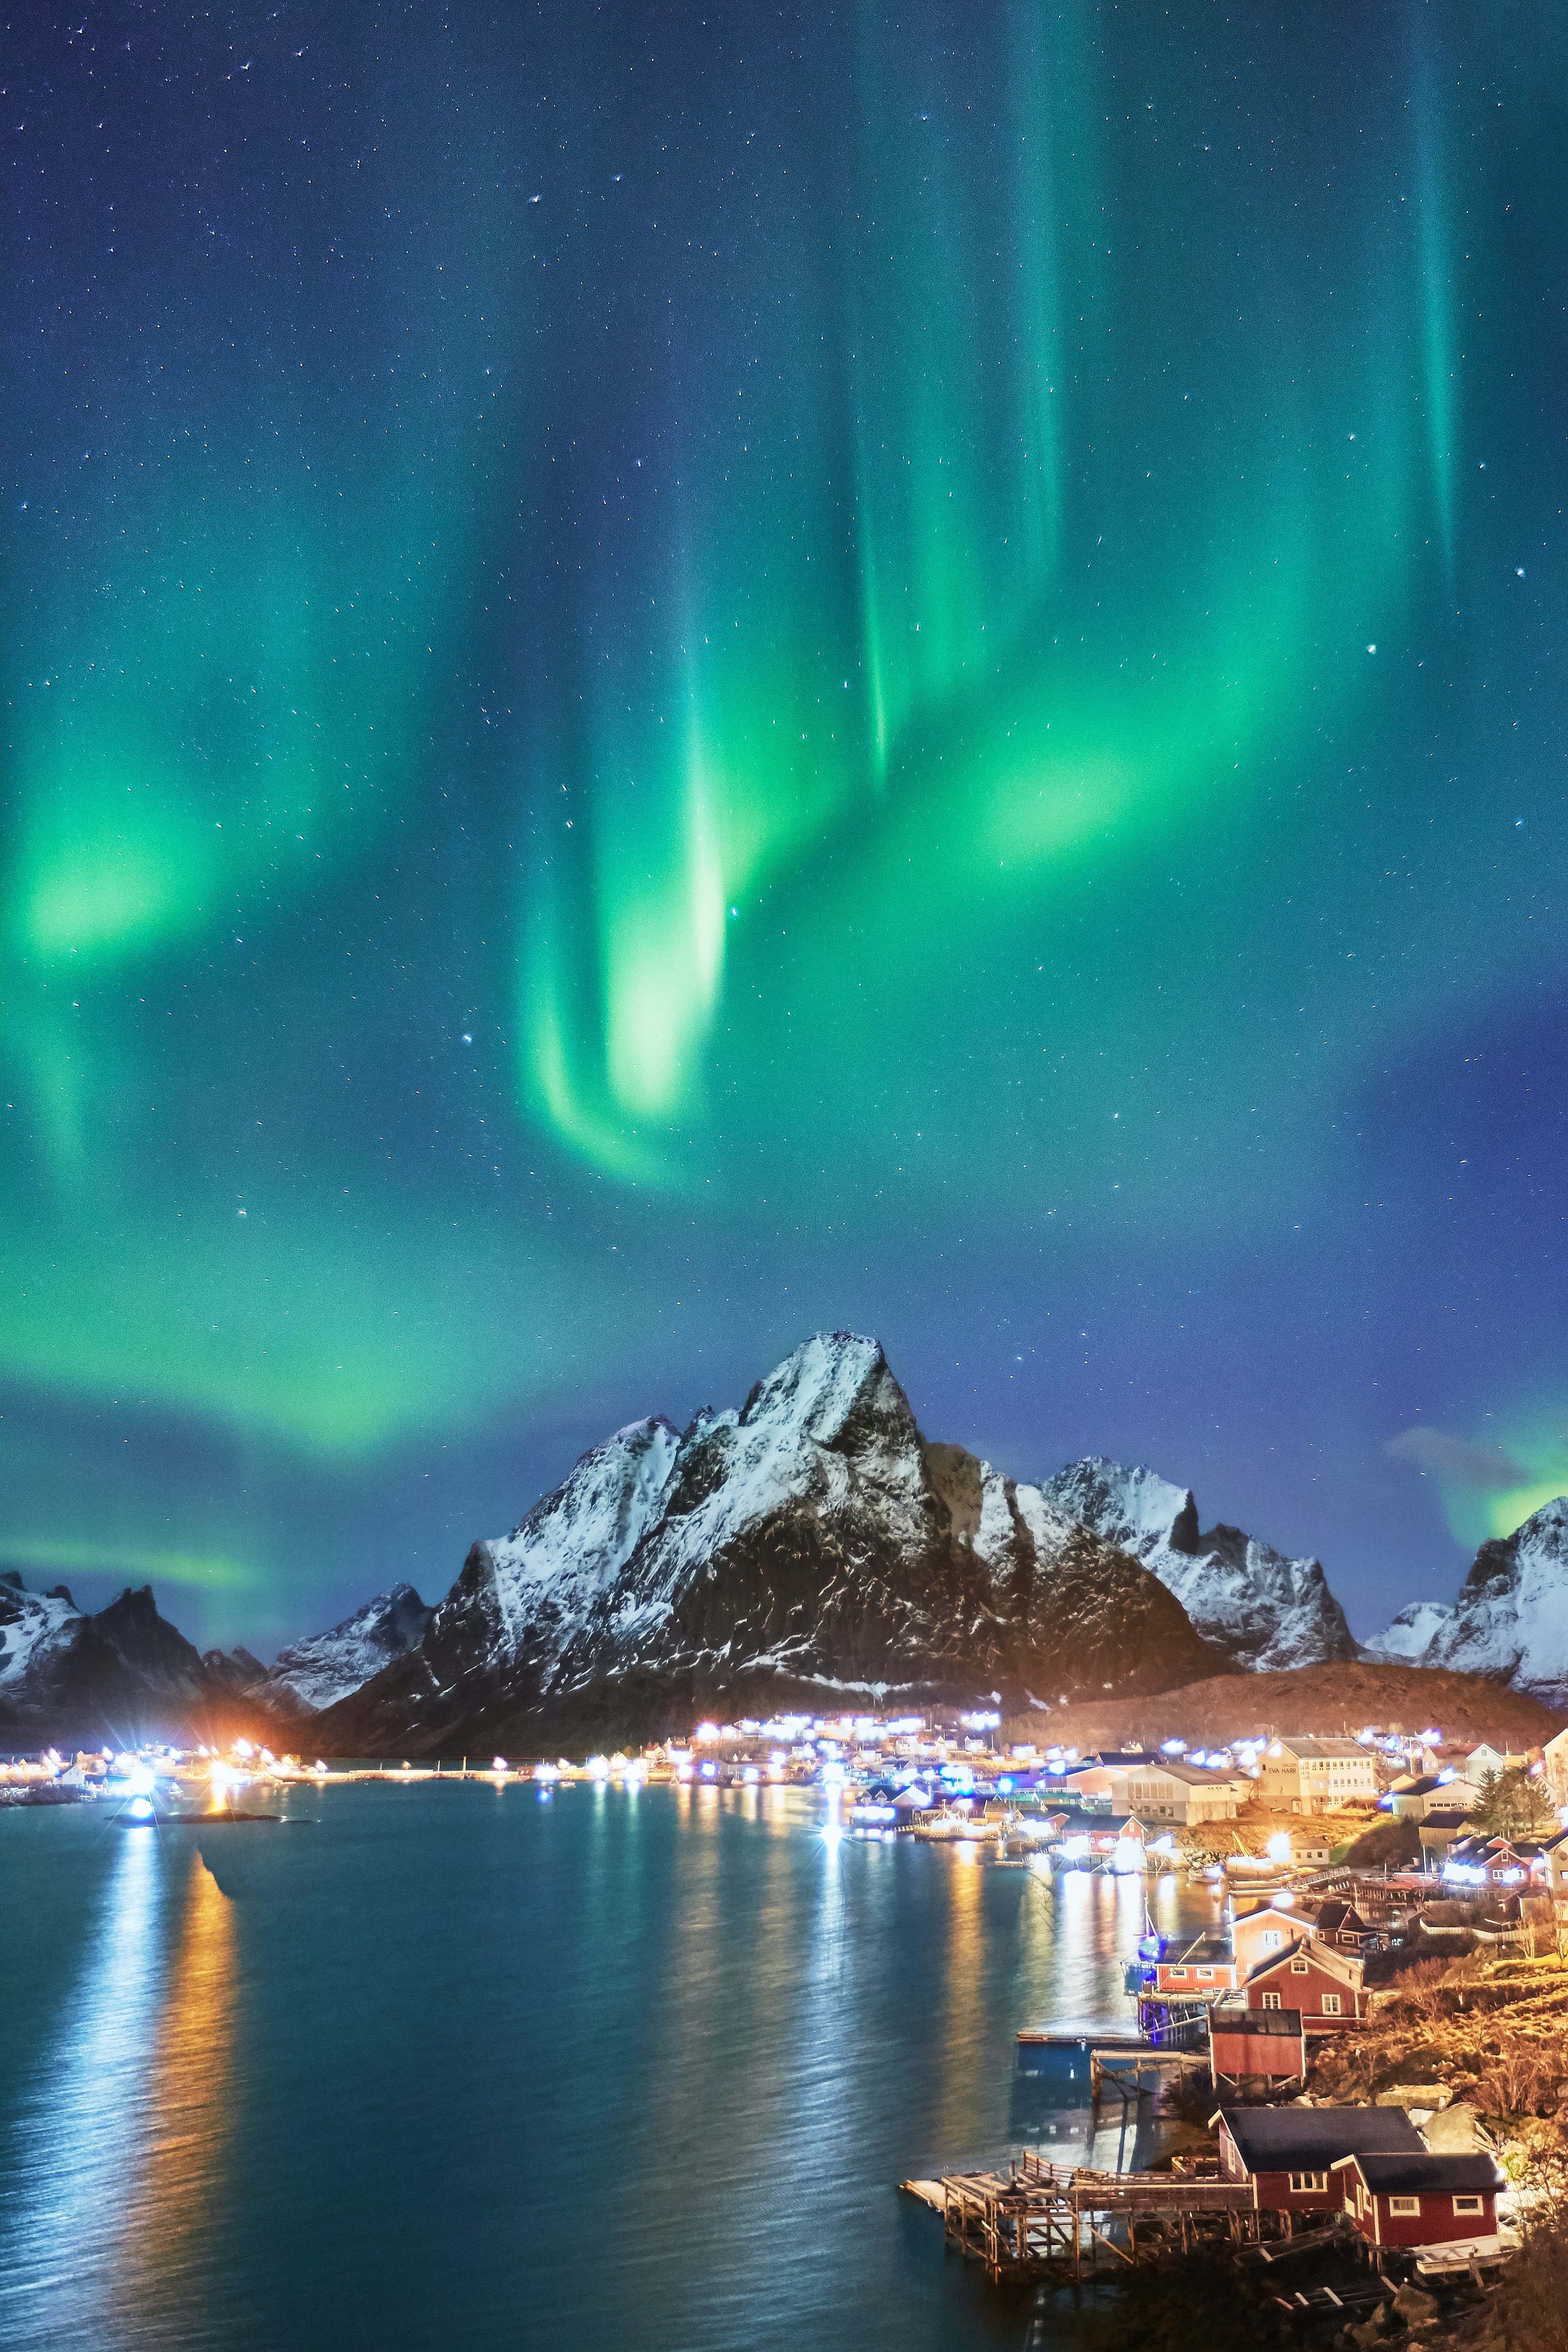 android aurora borealis, northern lights, nature, houses, mountains, snow, coast, snow covered, snowbound